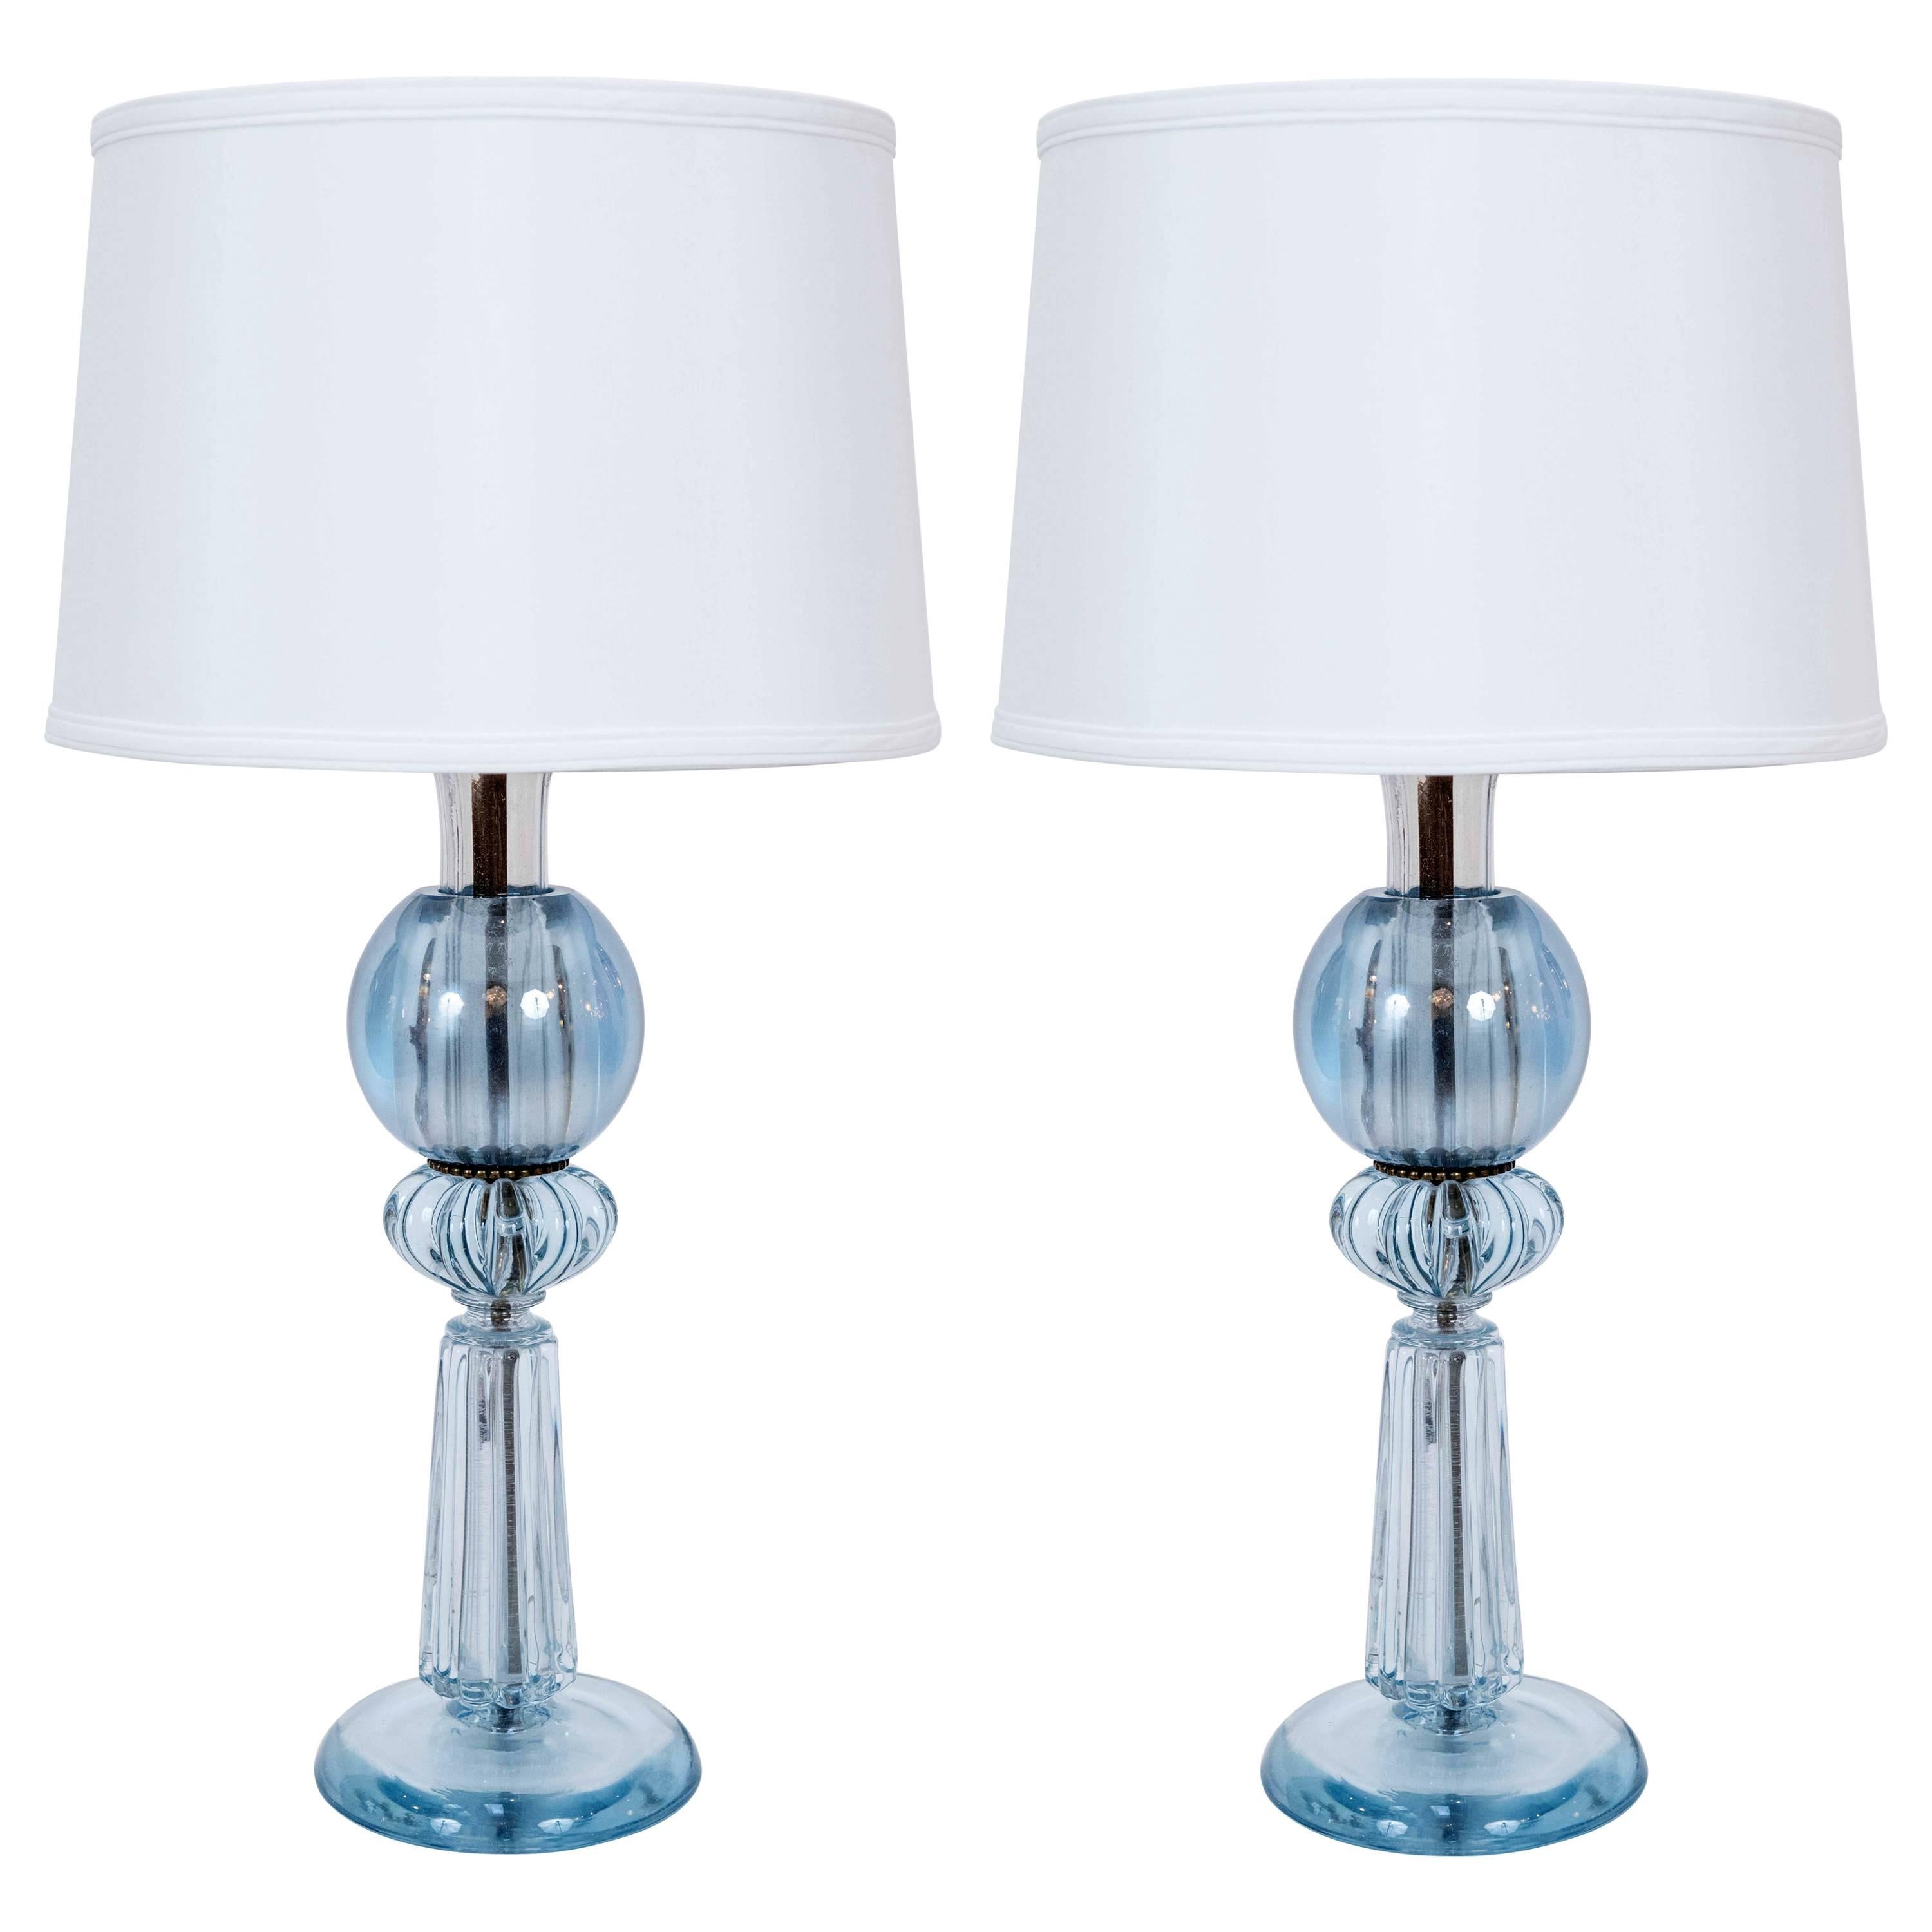  Pair of Vintage Mid-Century Blue Murano Lamps